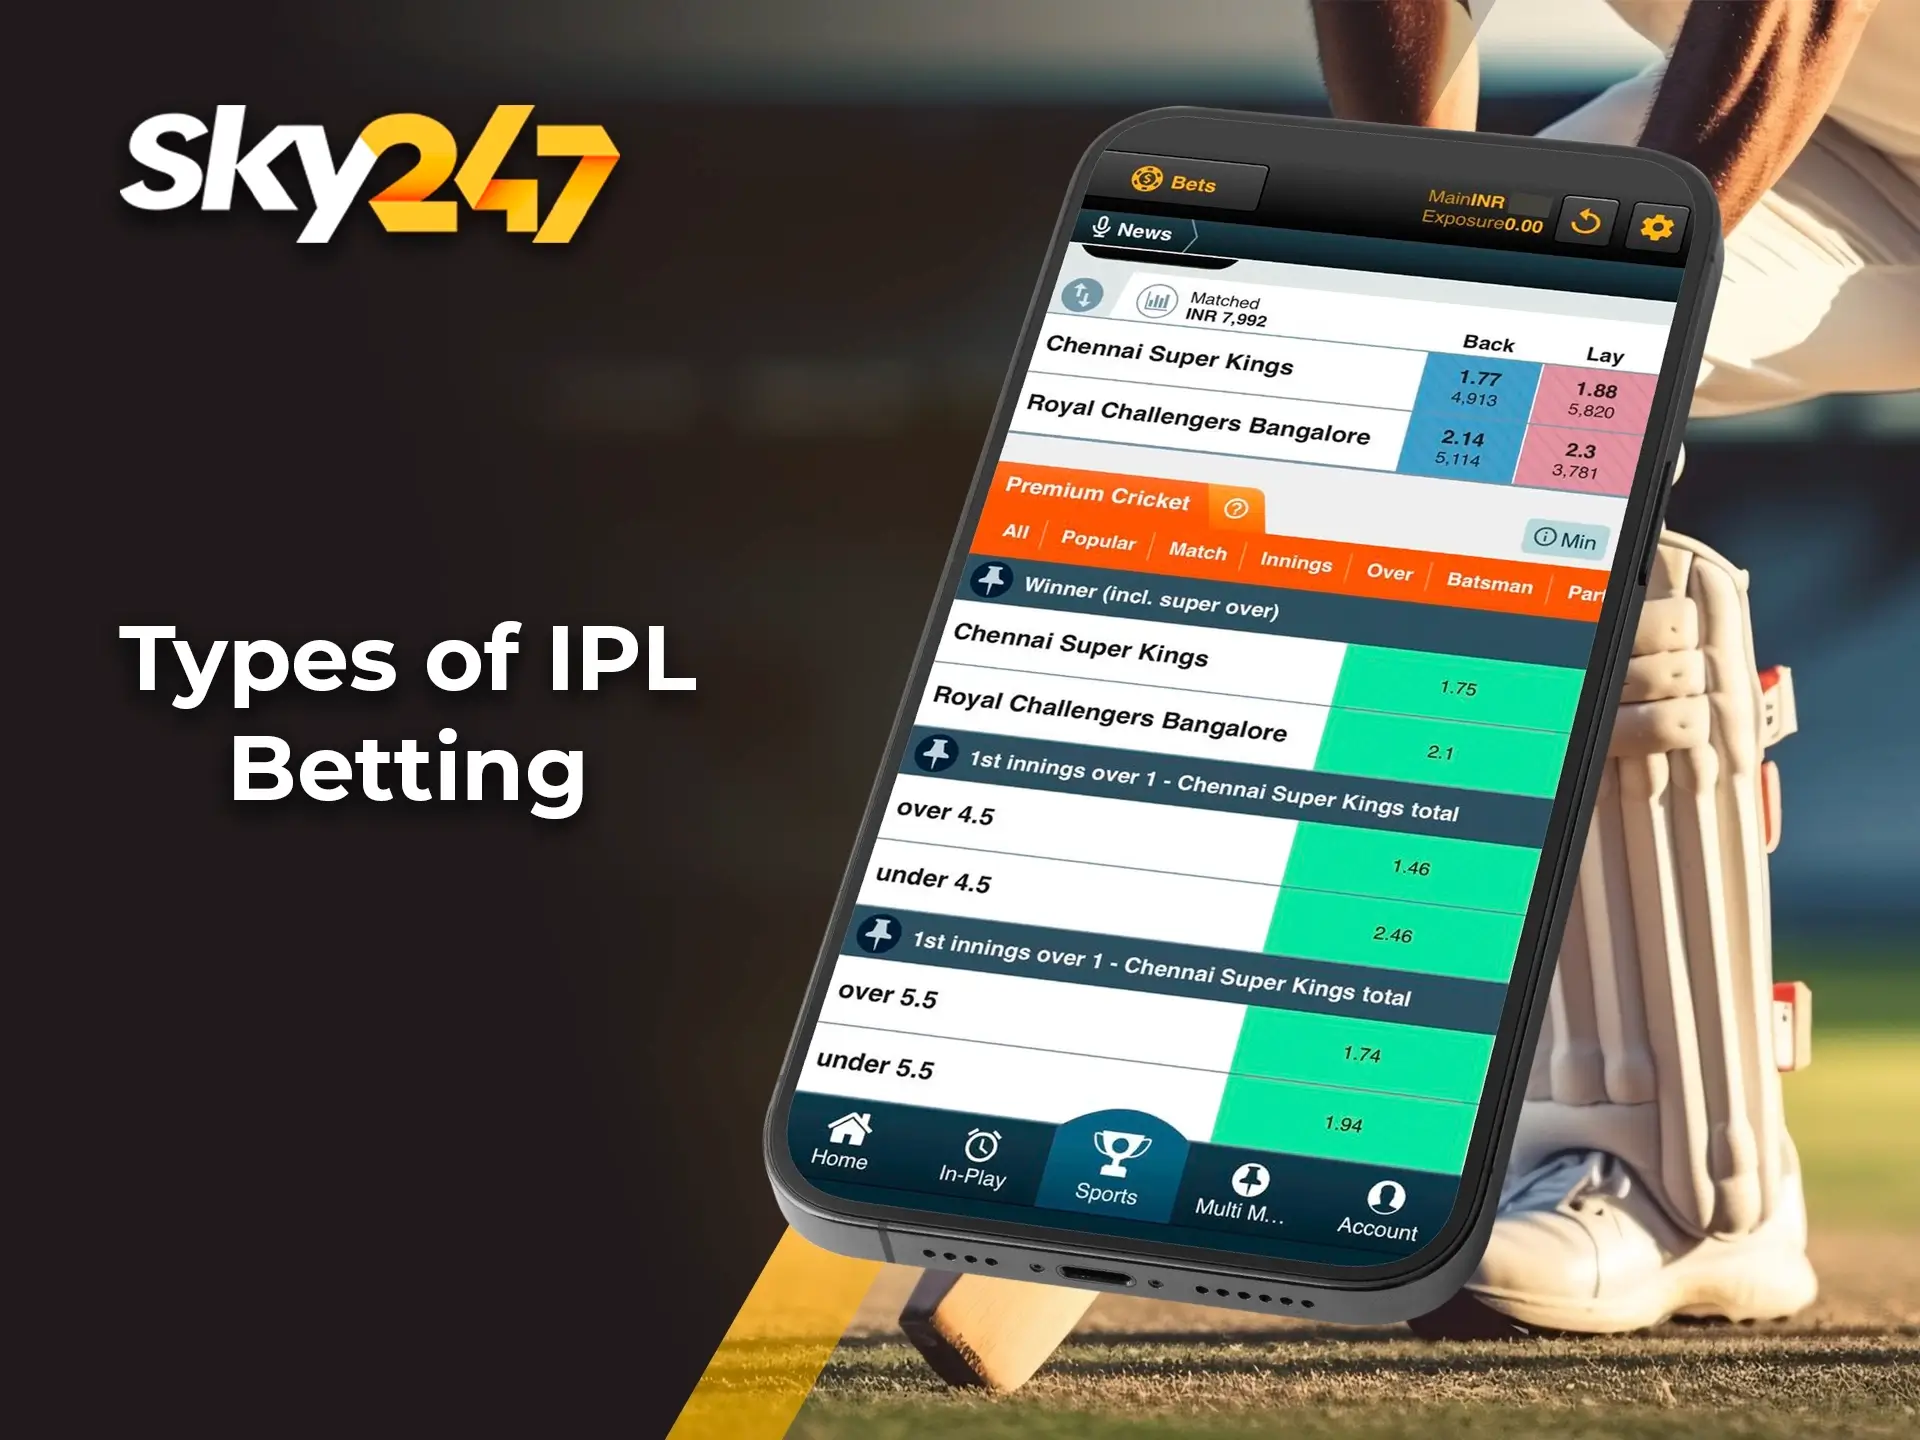 Check out the IPL tournament betting market and odds from bookmaker Sky247.